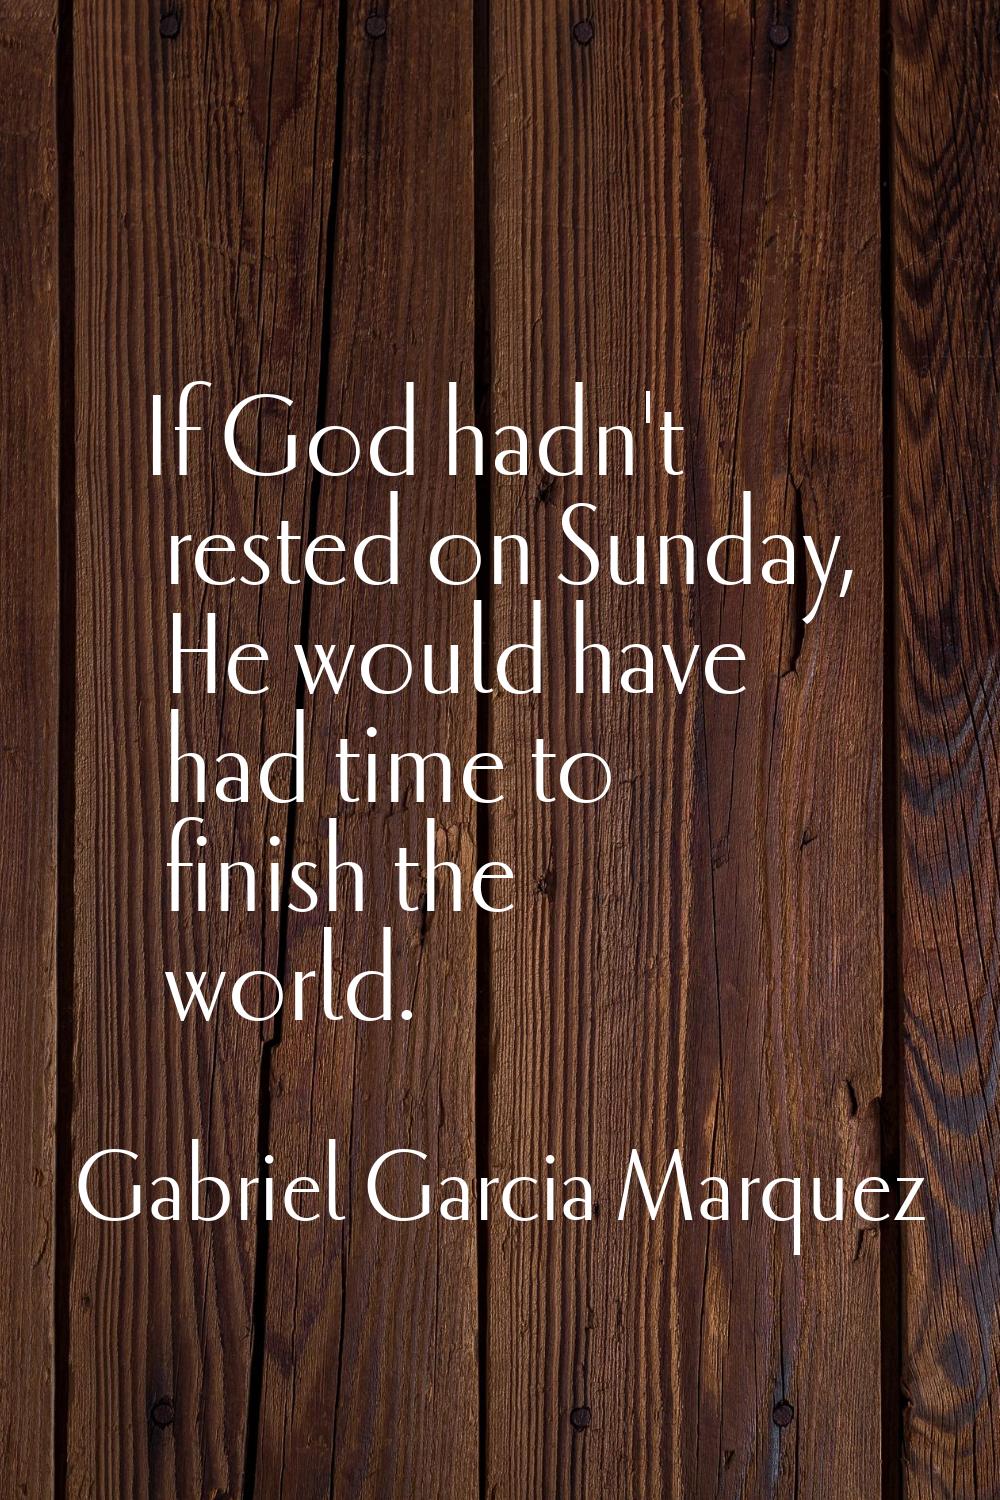 If God hadn't rested on Sunday, He would have had time to finish the world.